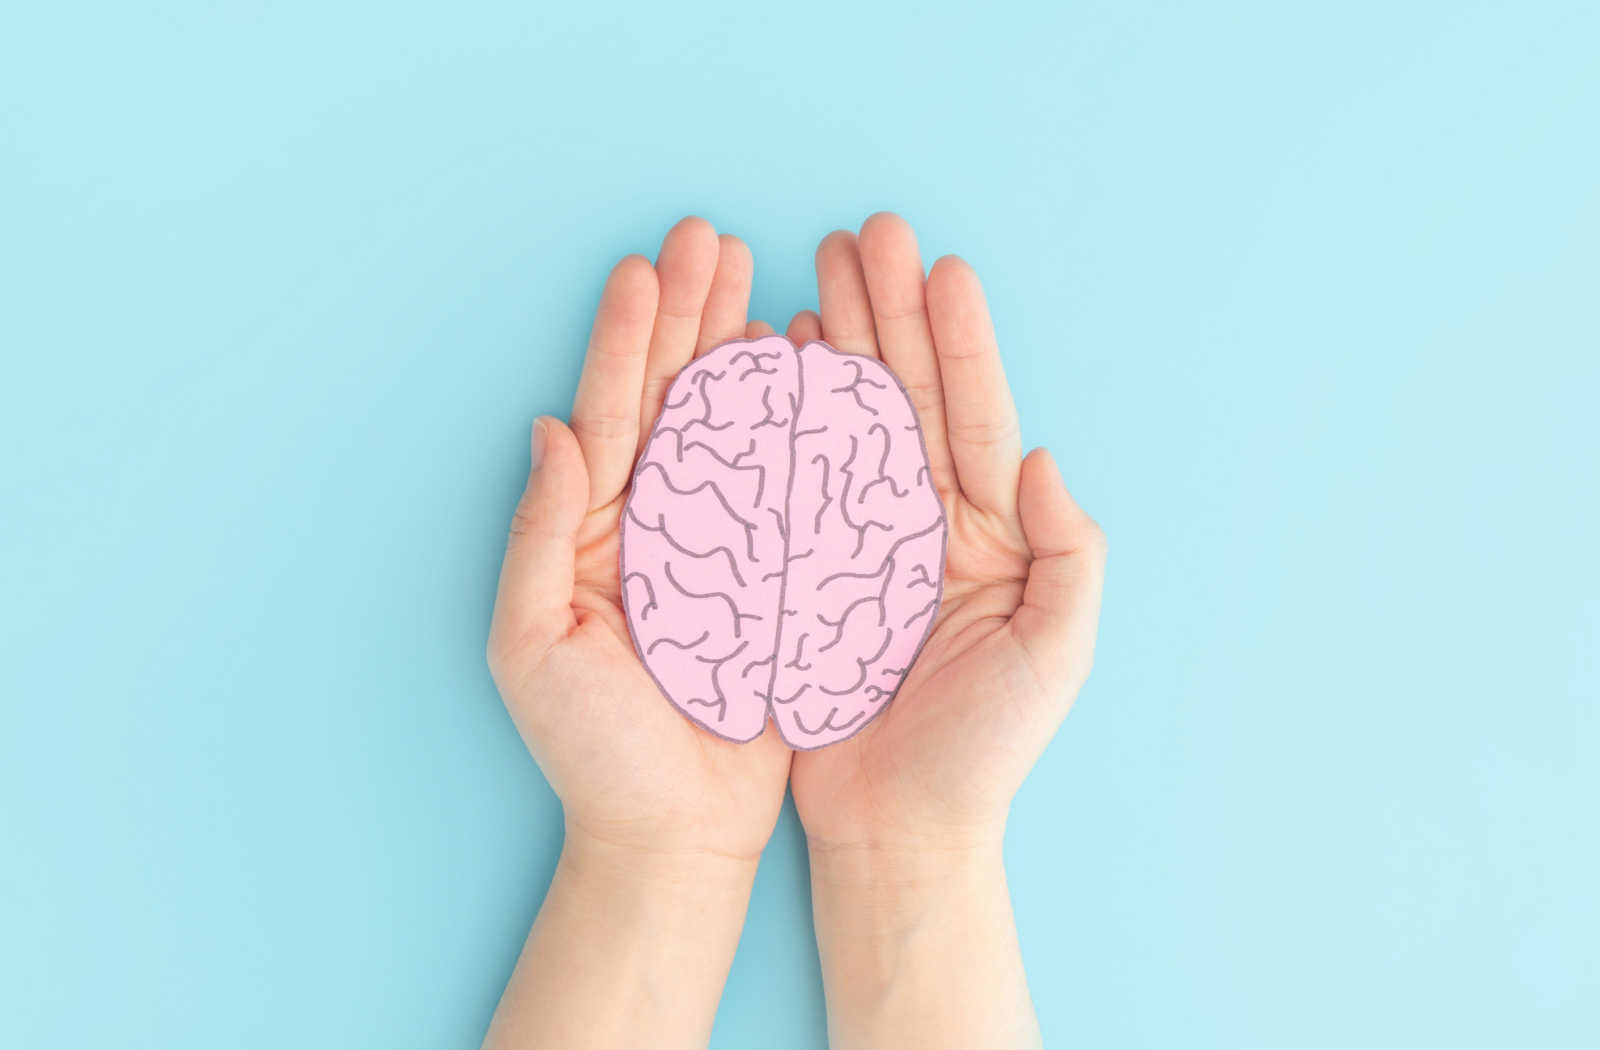 Hands cupped against a blue background holding a paper cutout of a brain.